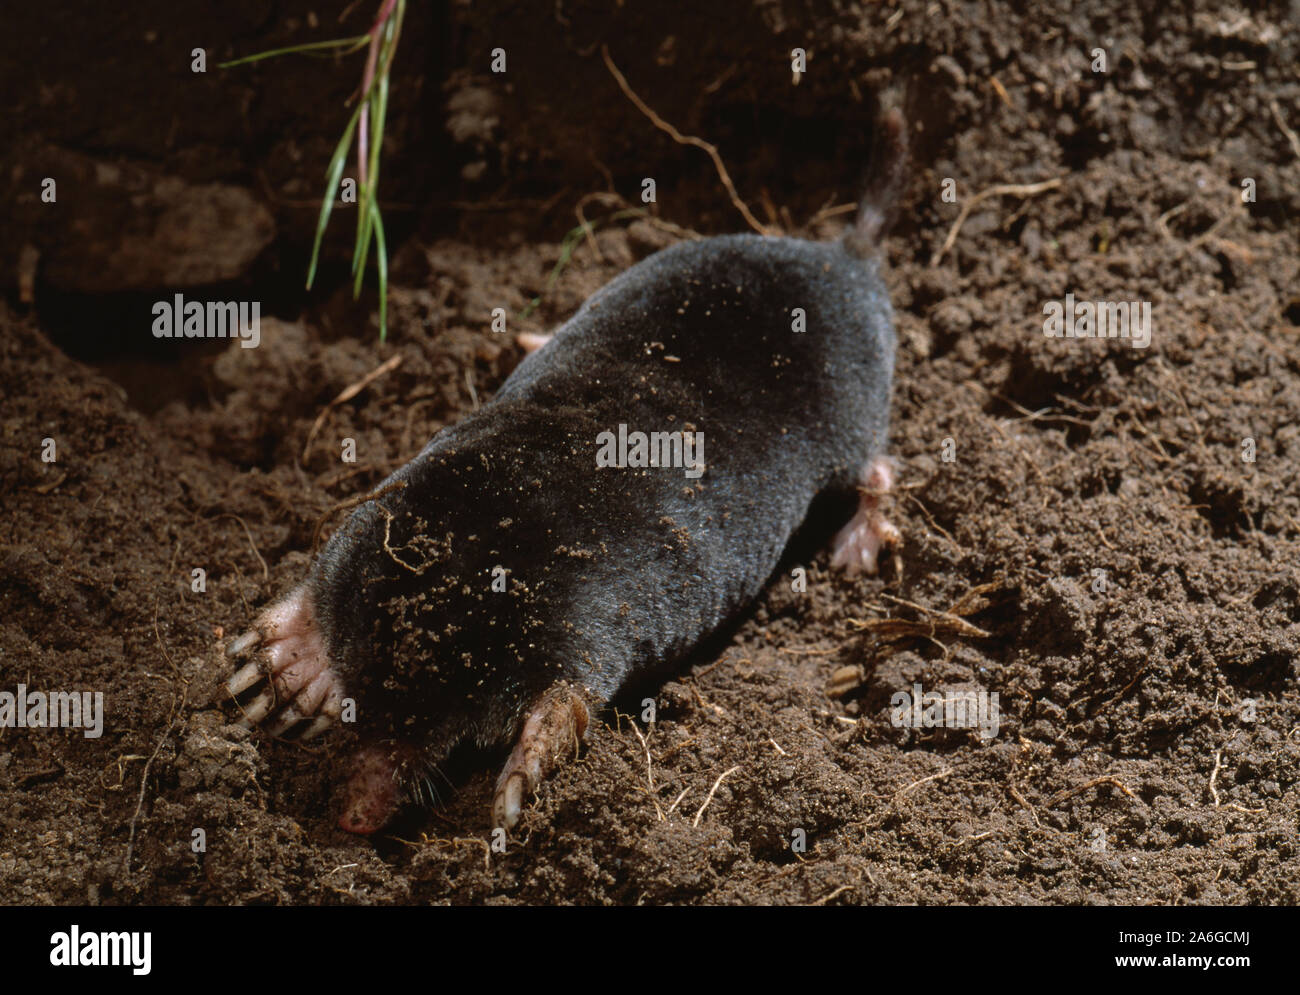 MOLE digging hole in soil (Talpa europaea). Note raised tail, indicative of a living, active animal. Tail used as a touch organ in underground tunnel. Stock Photo